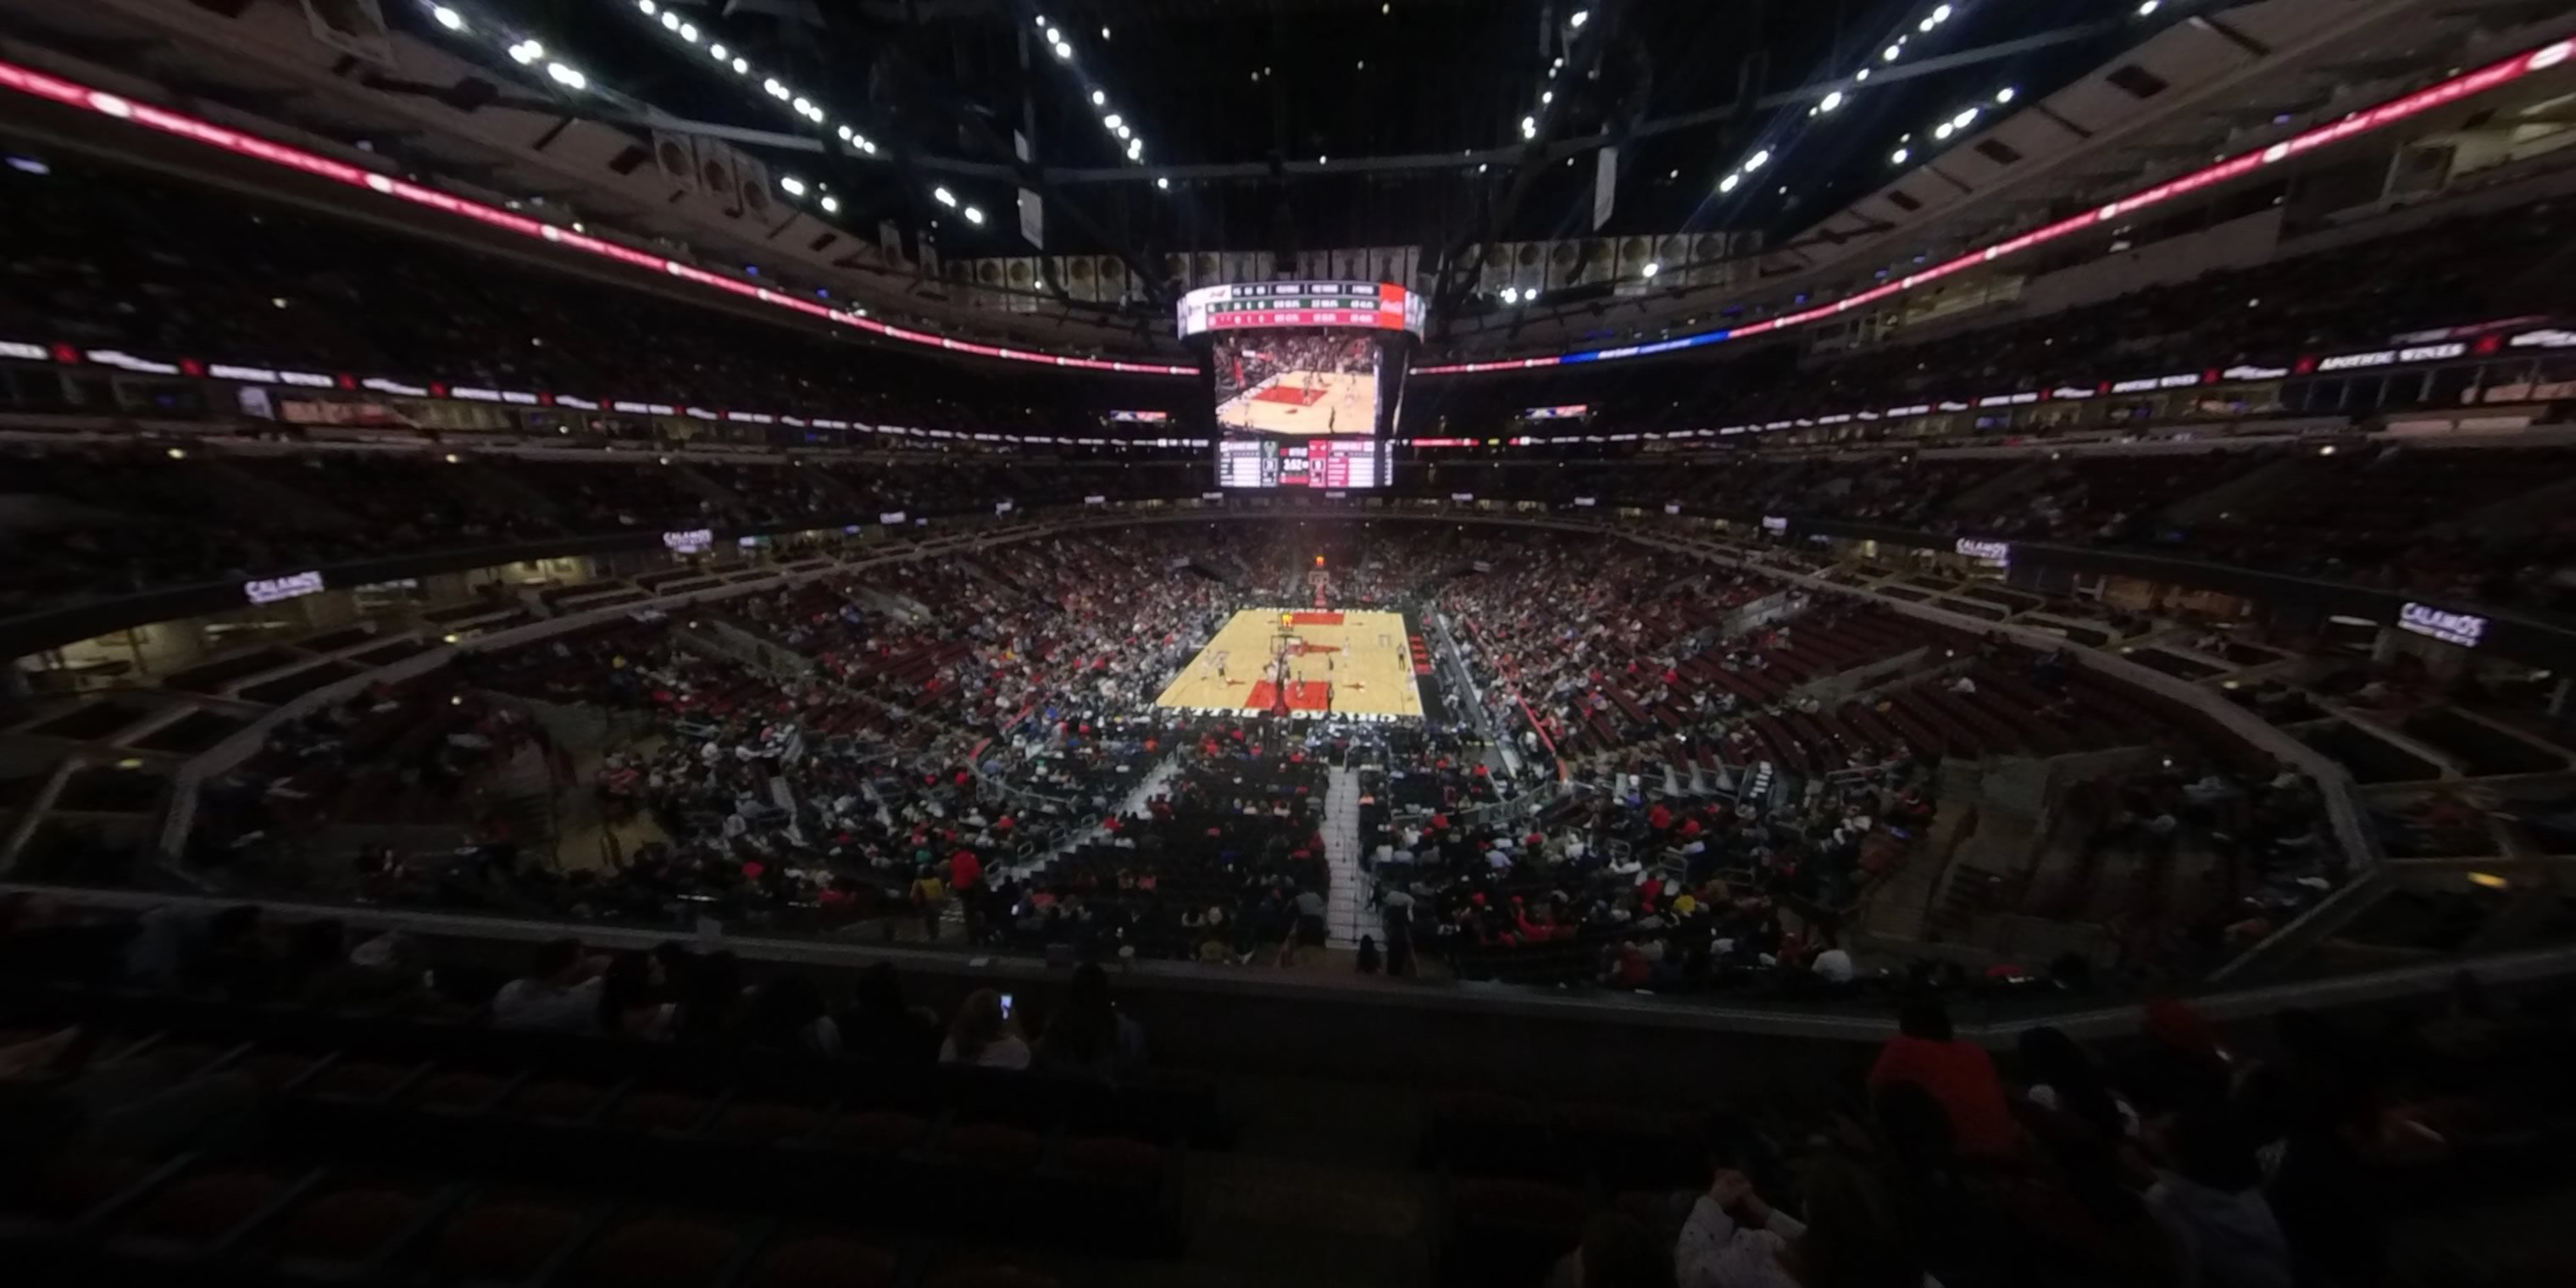 section 225 panoramic seat view  for basketball - united center